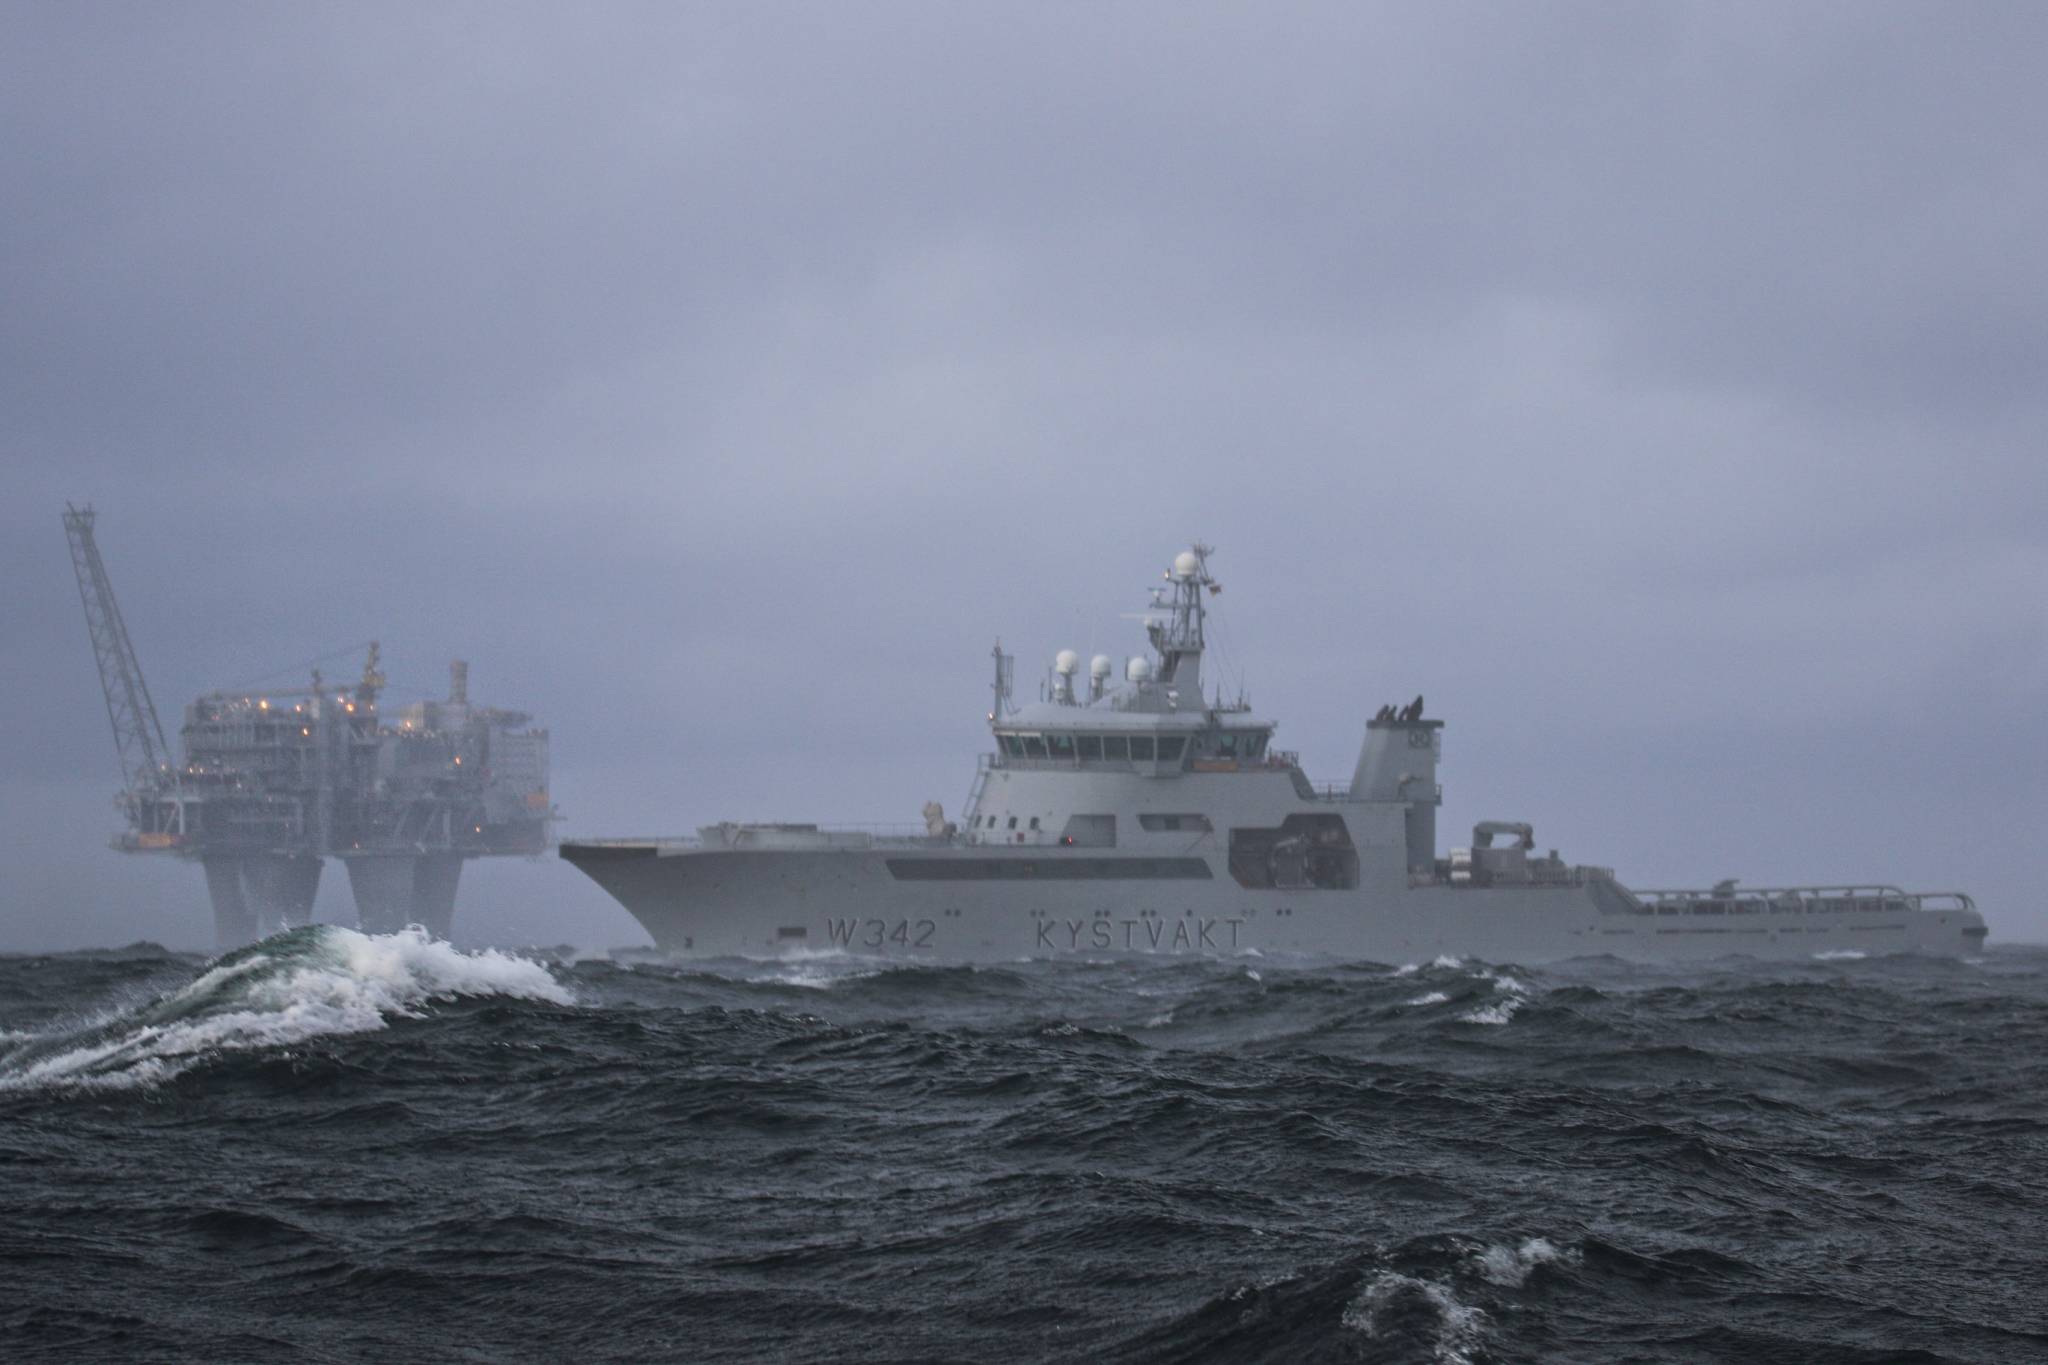 The Royal Norwegian Navy's KV Sortland pictured near the Troll A platform in the North Sea in September 2022. Photo courtesy Royal Norwegian Navy